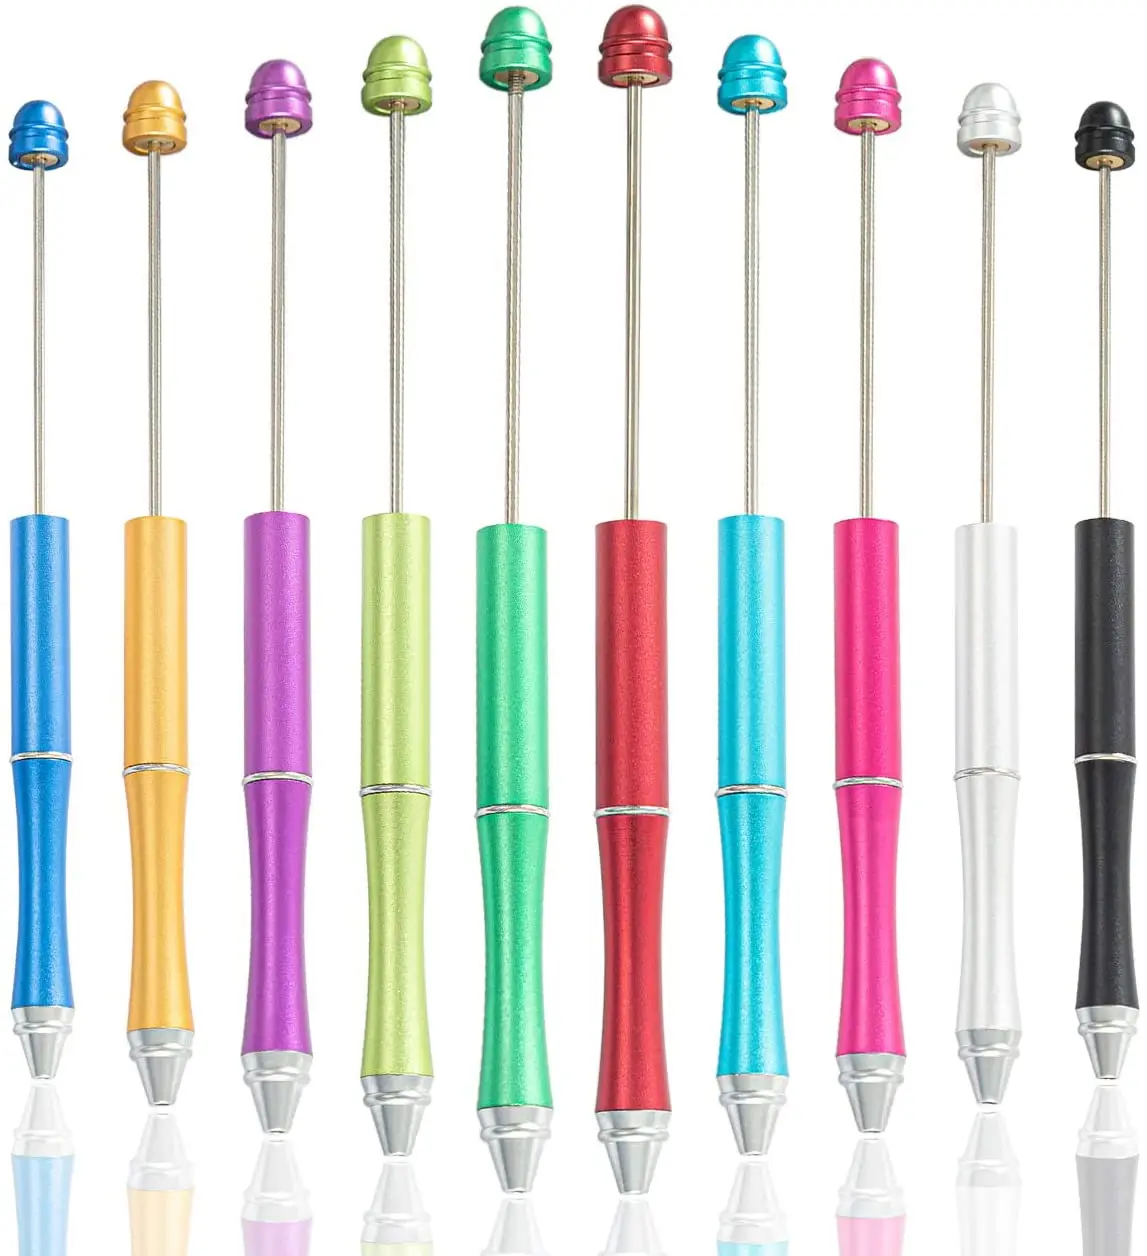 10pcs Metal Ballpoint Pen Beadable Pens Japanese Stationery Bead Pens for Writing School Office Supply Kids Gift Luxury Pen creative leather bag metal shell ballpoint pen office for school stationery gift pen and hotel business luxury pen